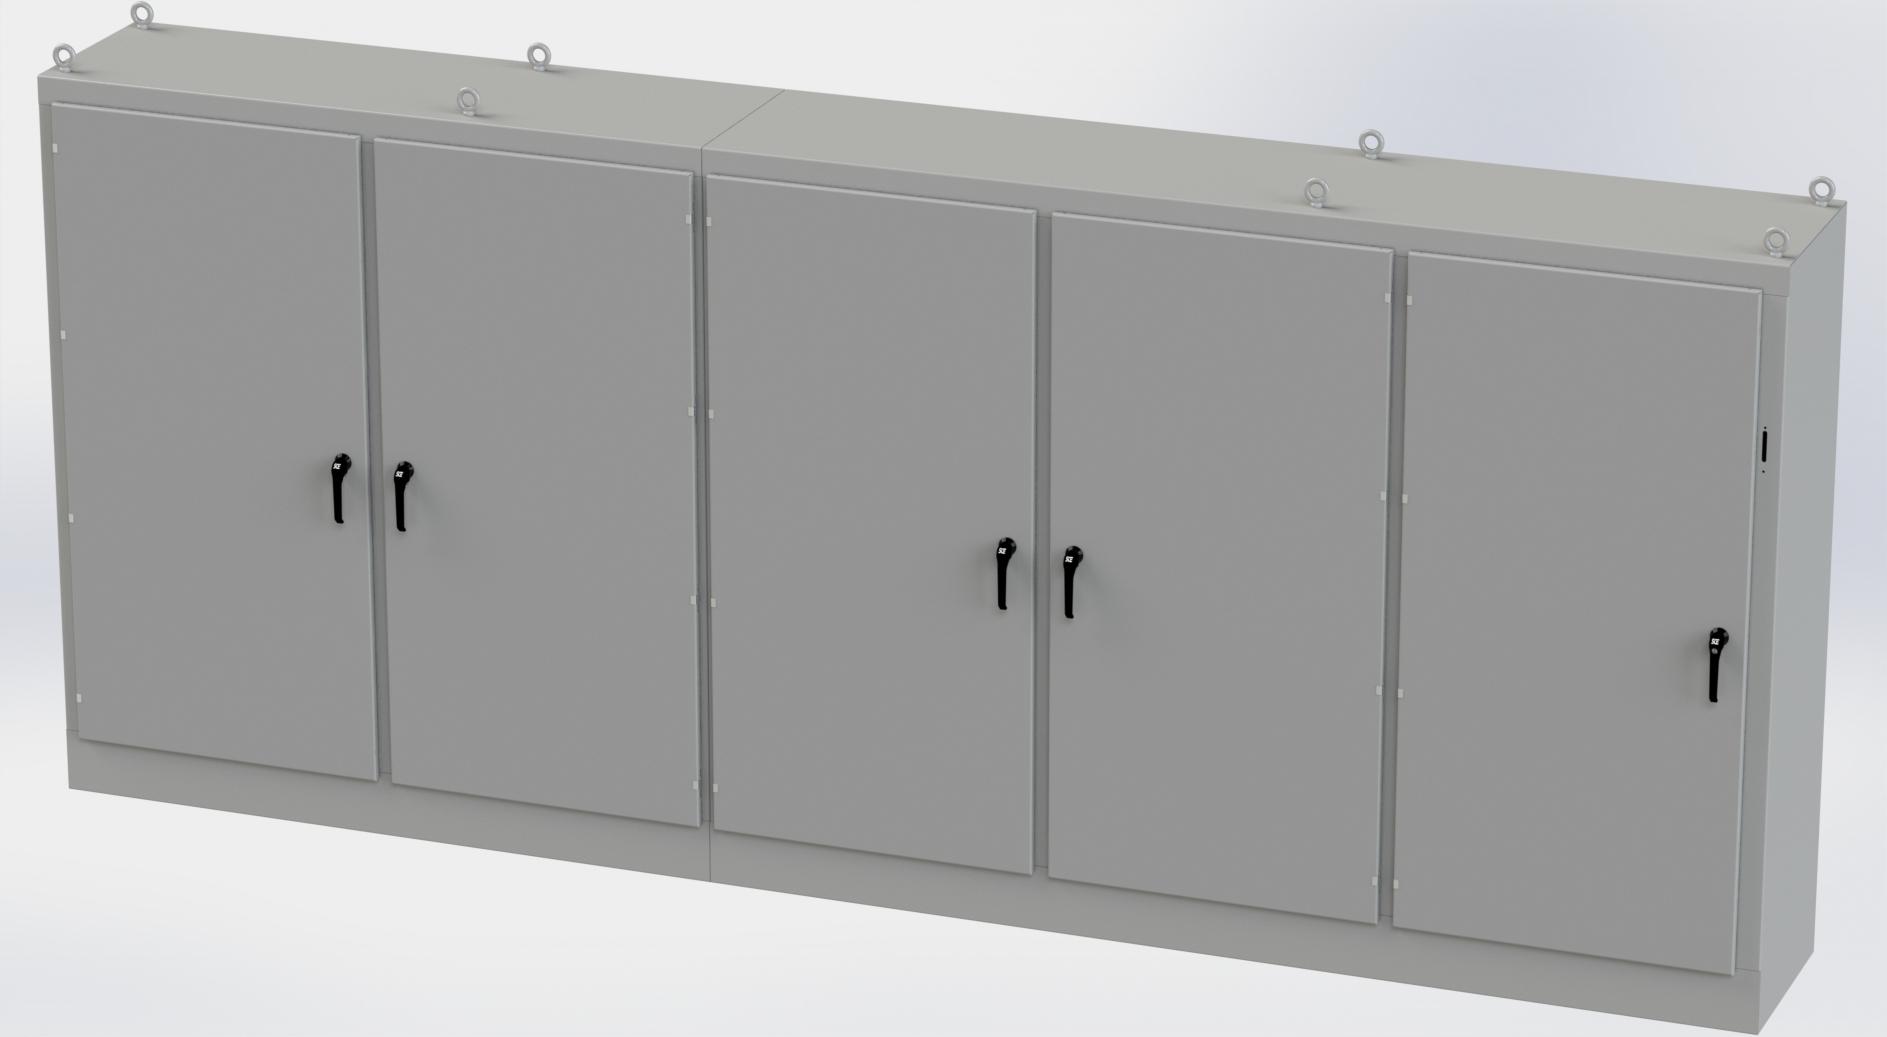 Saginaw Control SCE-84XM5EW24 5DR XM Enclosure, Height:84.00", Width:196.75", Depth:24.00", ANSI-61 gray powder coating inside and out. Sub-panels are powder coated white.